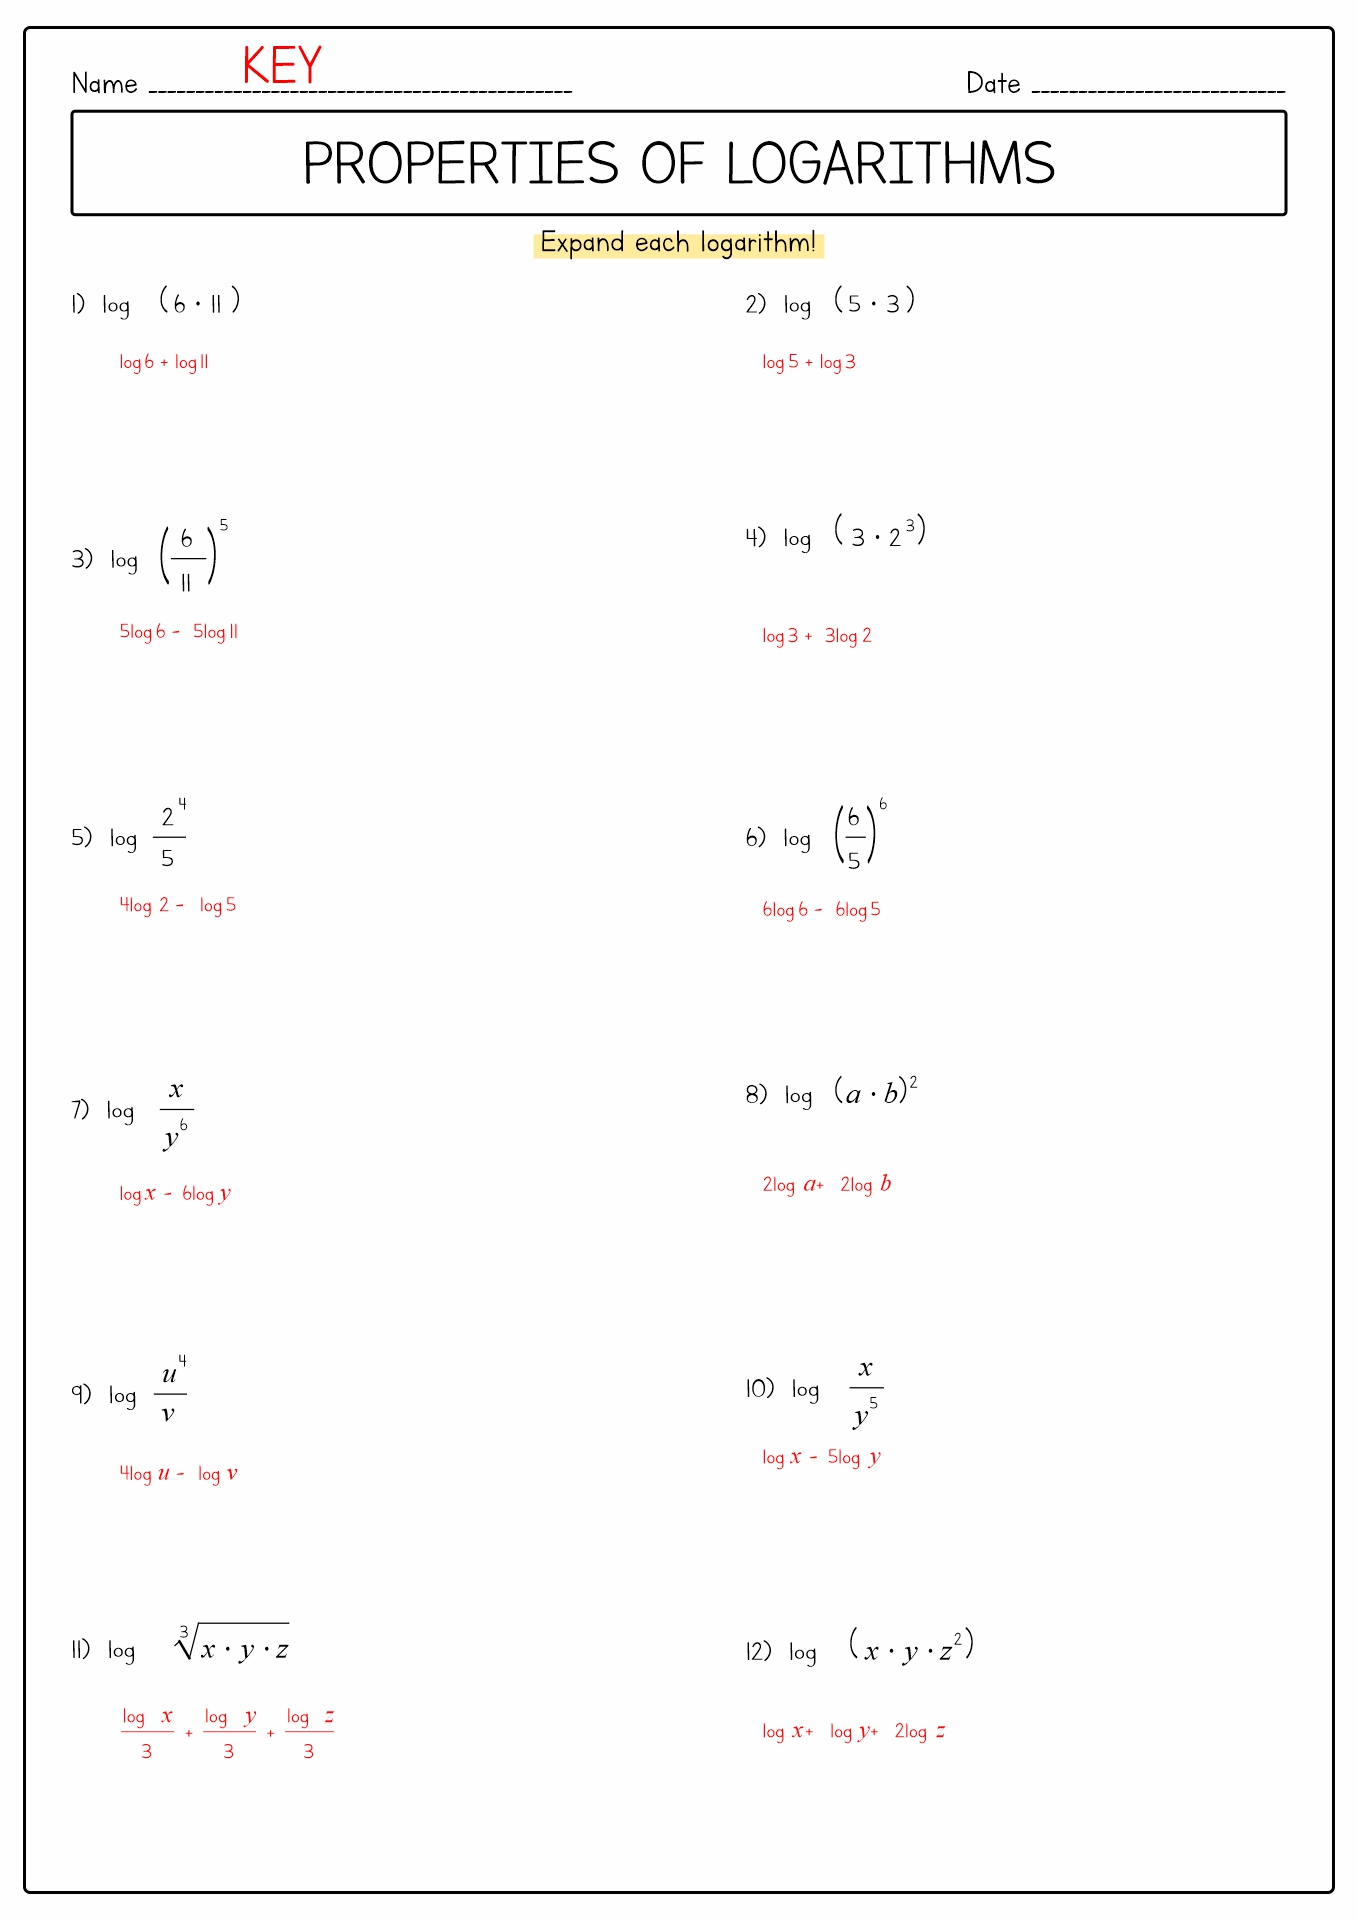 Properties of Logarithms Worksheet Answers Image